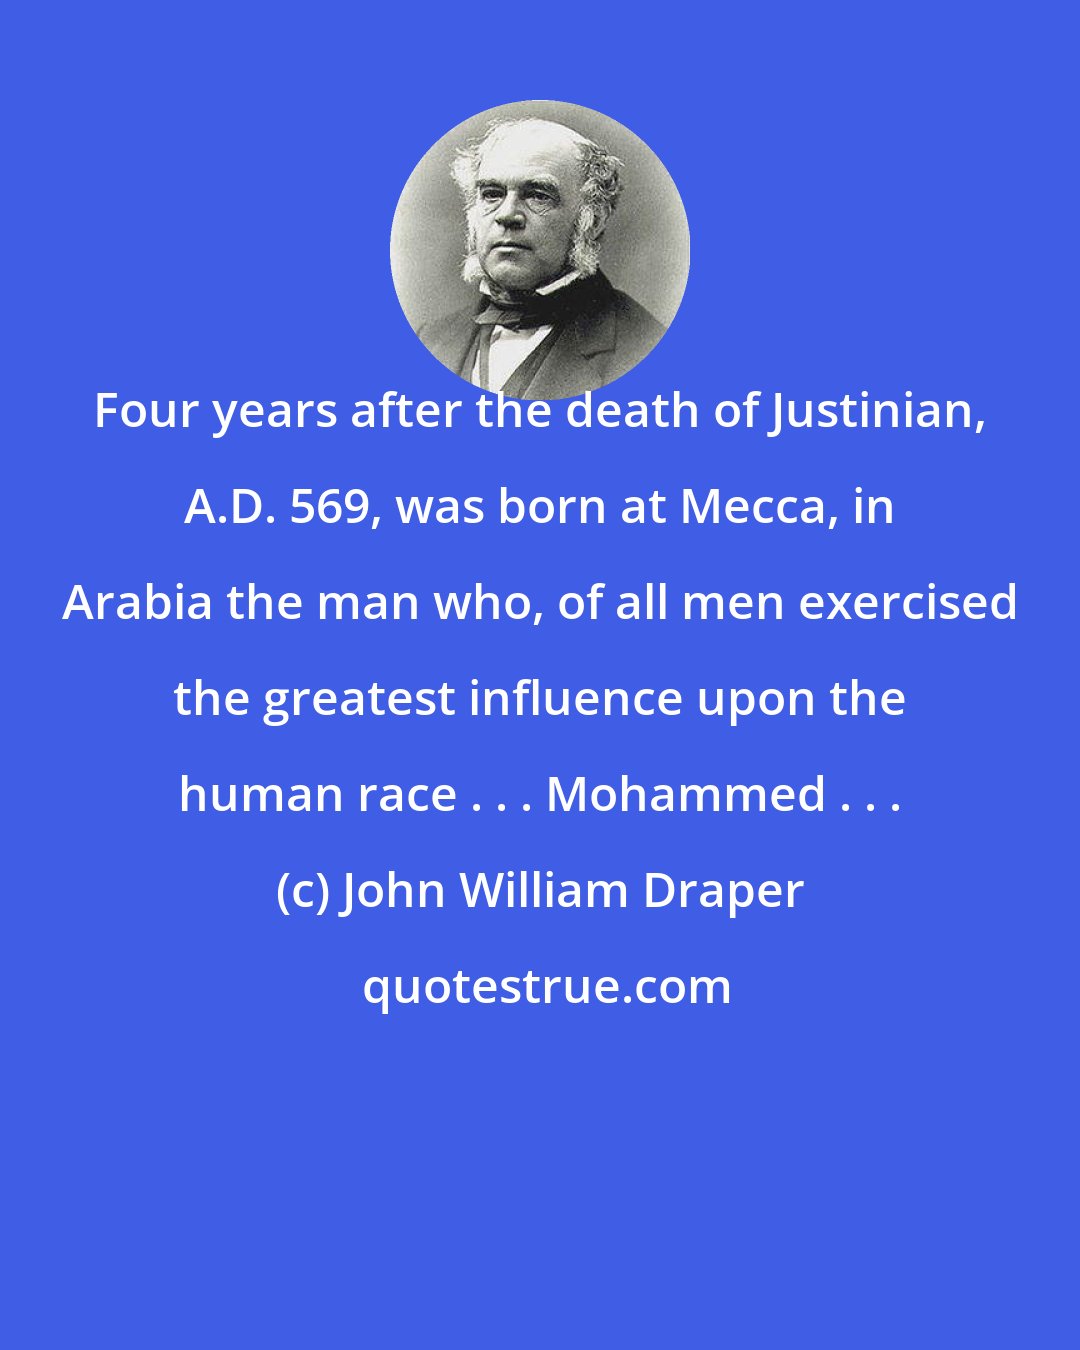 John William Draper: Four years after the death of Justinian, A.D. 569, was born at Mecca, in Arabia the man who, of all men exercised the greatest influence upon the human race . . . Mohammed . . .